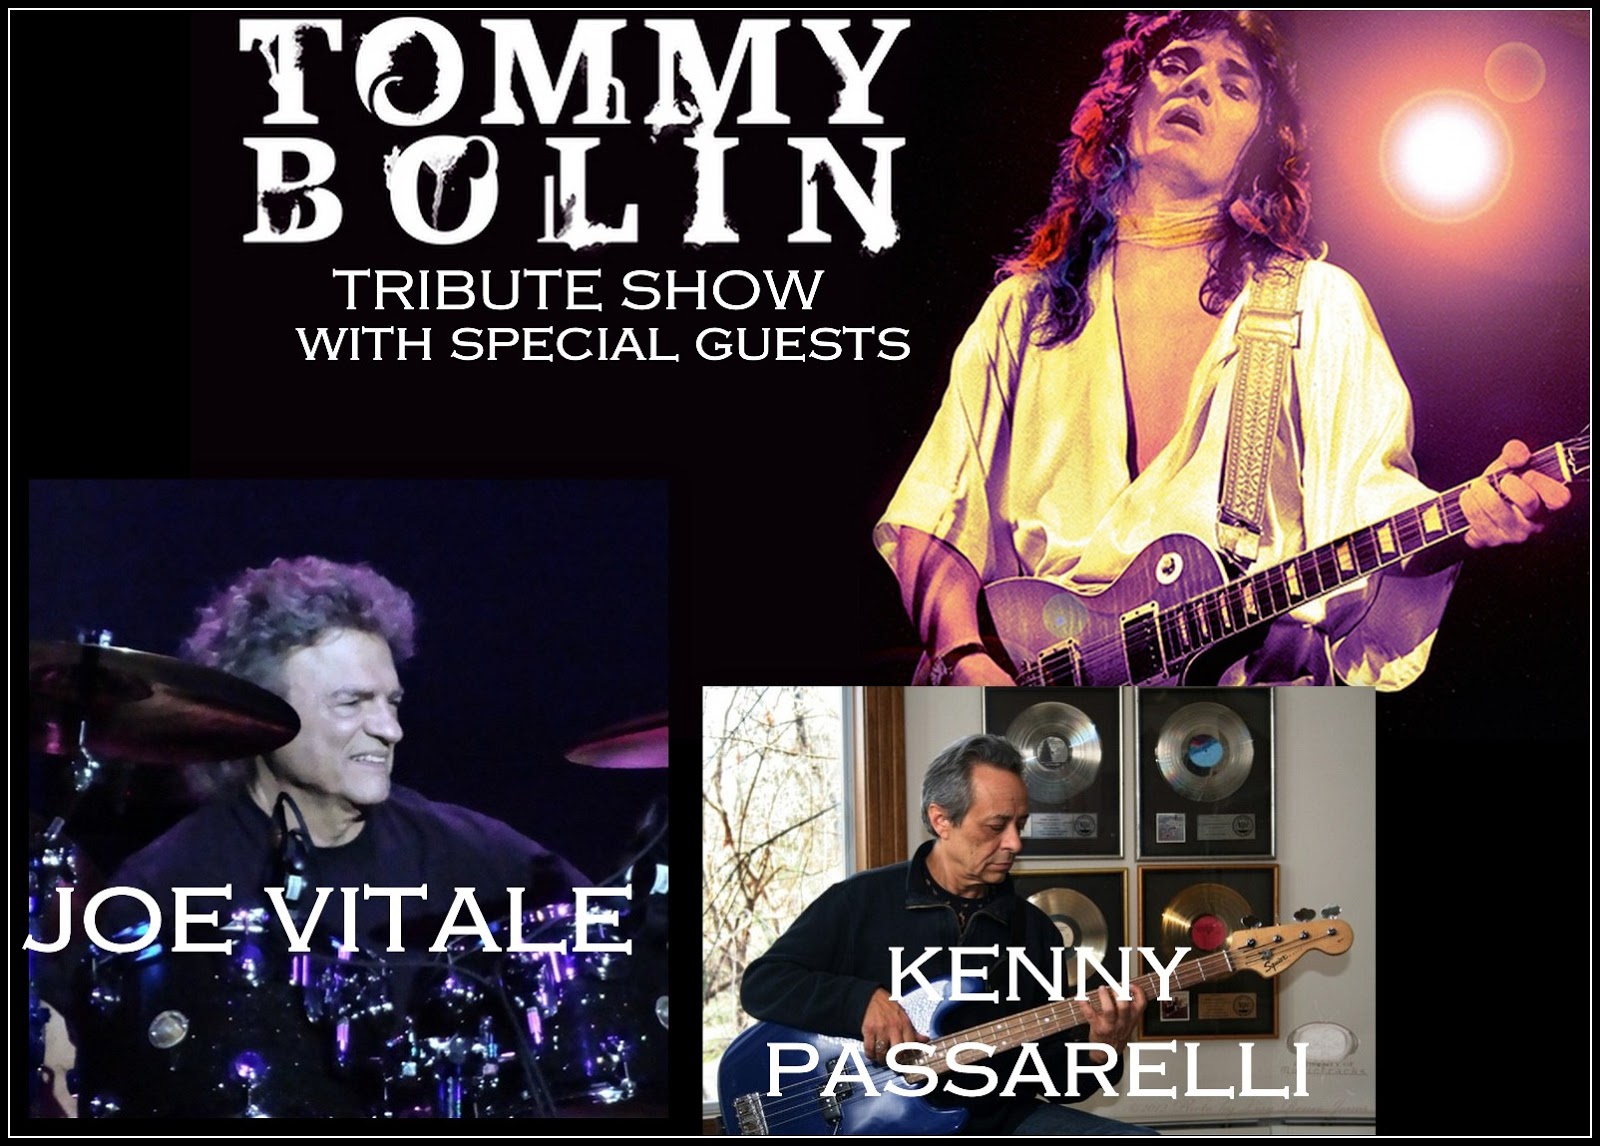 THE CLASSIC ROCK MUSIC REPORTER: TOMMY BOLIN TRIBUTE SHOW WITH JOE VITALE  AND KENNY PASSARELLI OF JOE WALSH  BARNSTORM -BBS RADIO